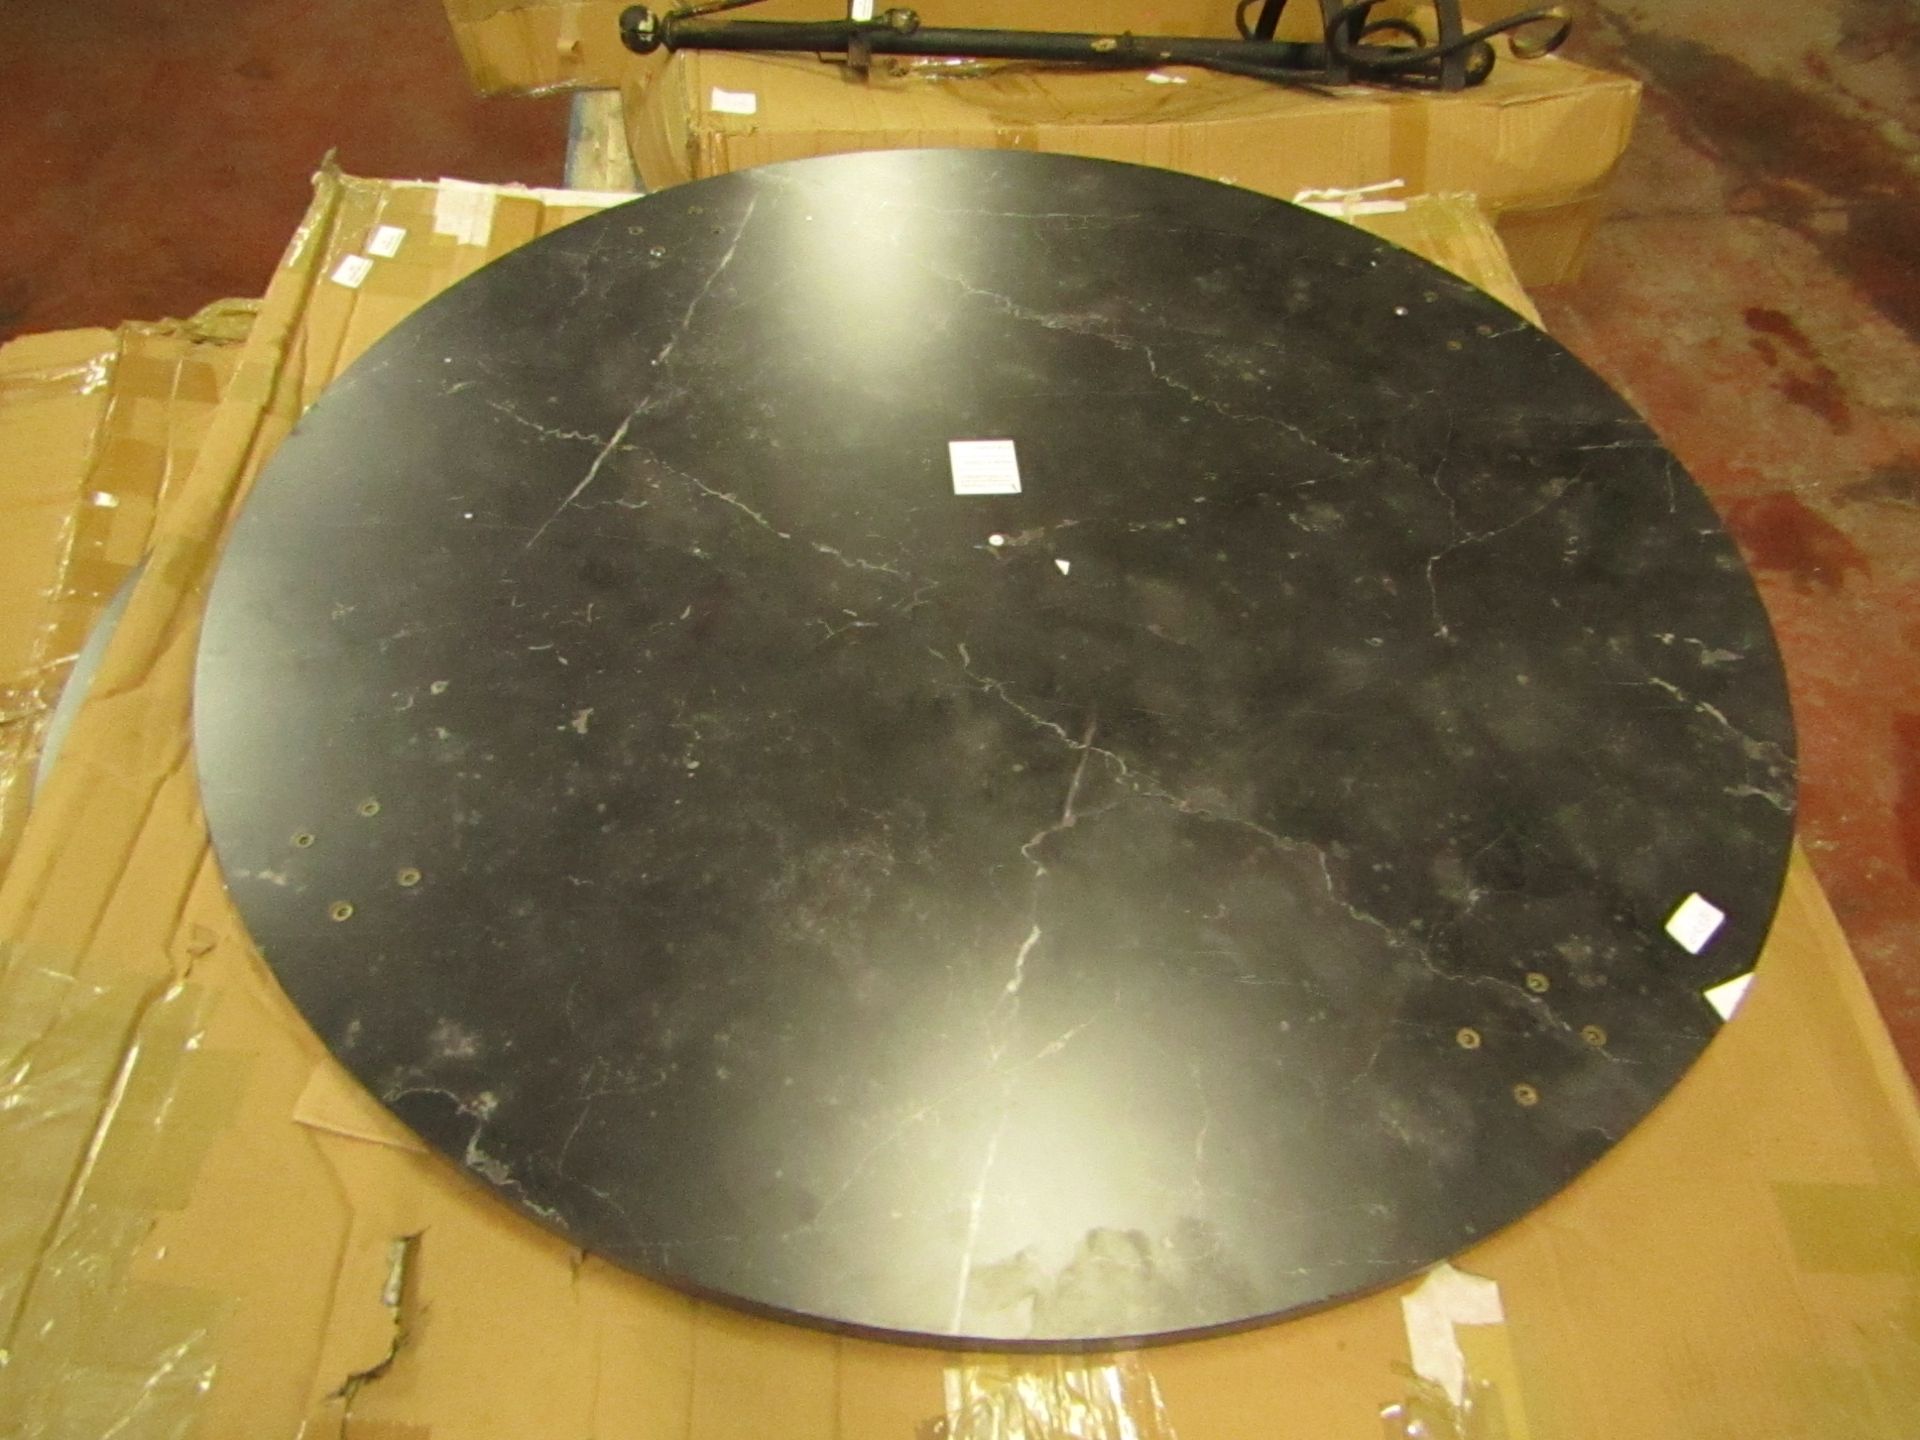 | 1X | MADE.COM AMBLE 4 SEAT ROUND DINING TABLE | BLACK MARBLE EFFECT & BLACK | UNCHECKED | RRP £- |